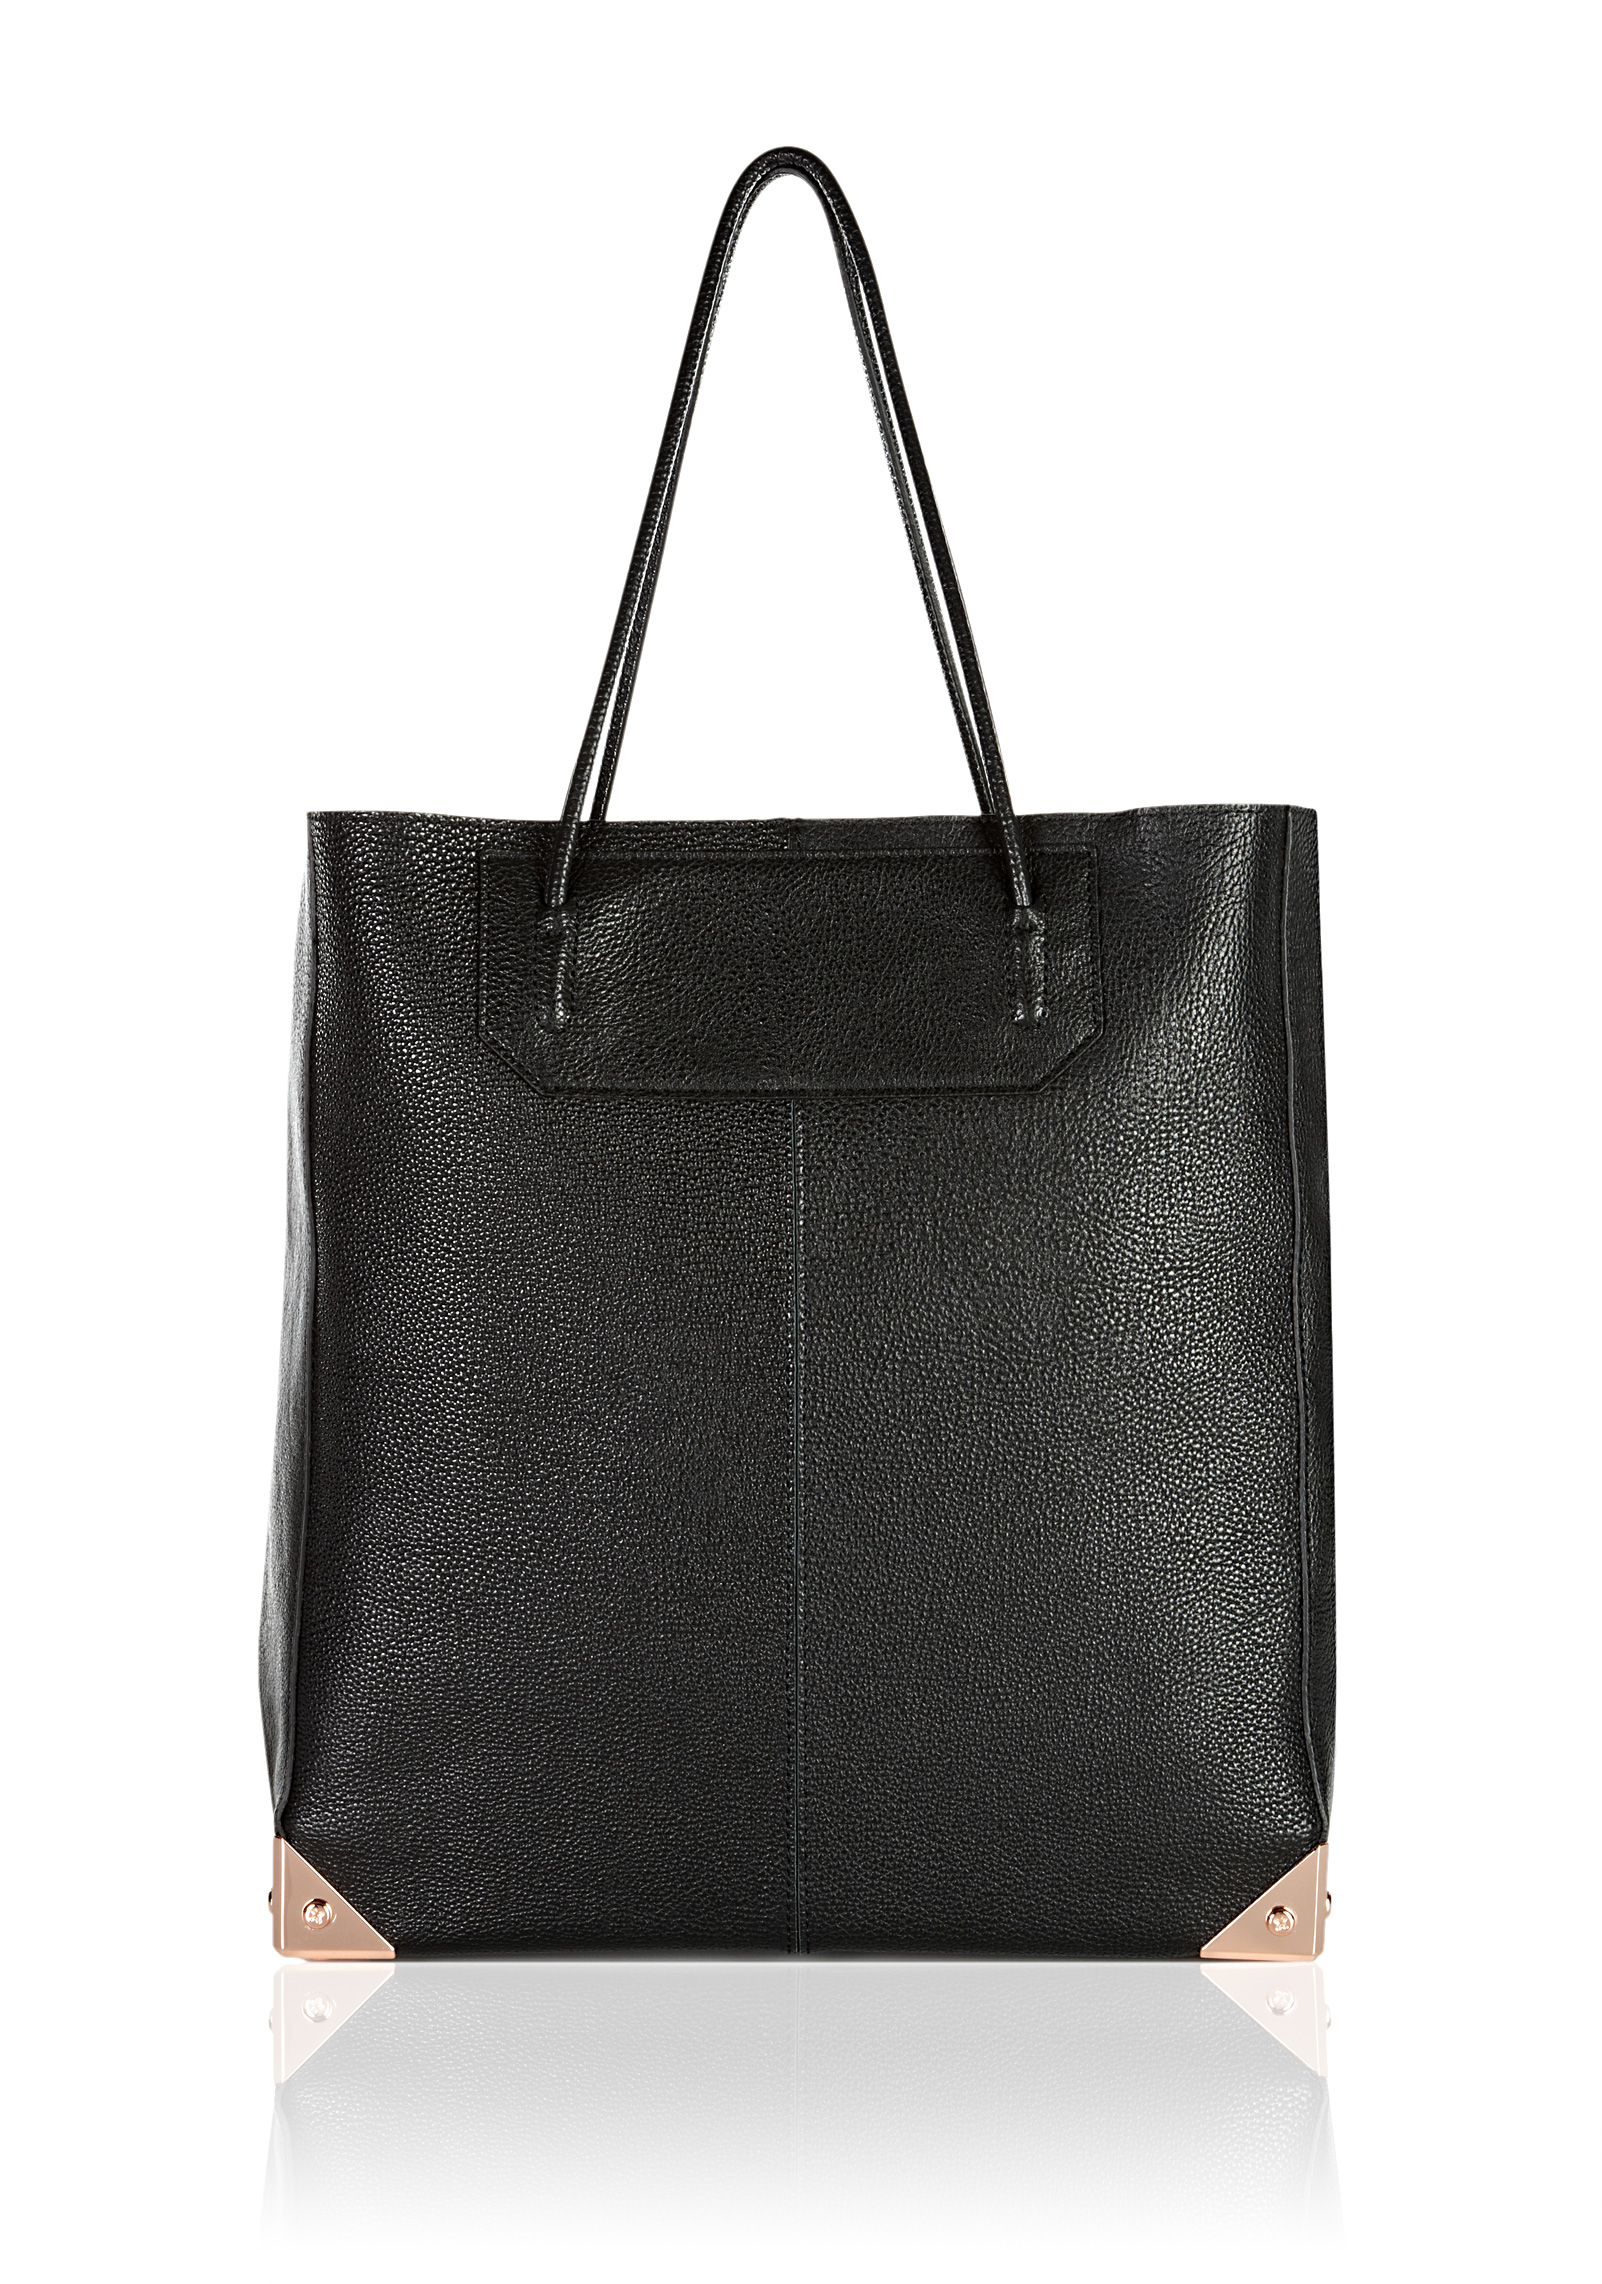 Lyst - Alexander Wang Prisma Tote with Rose Gold Hardware in Black